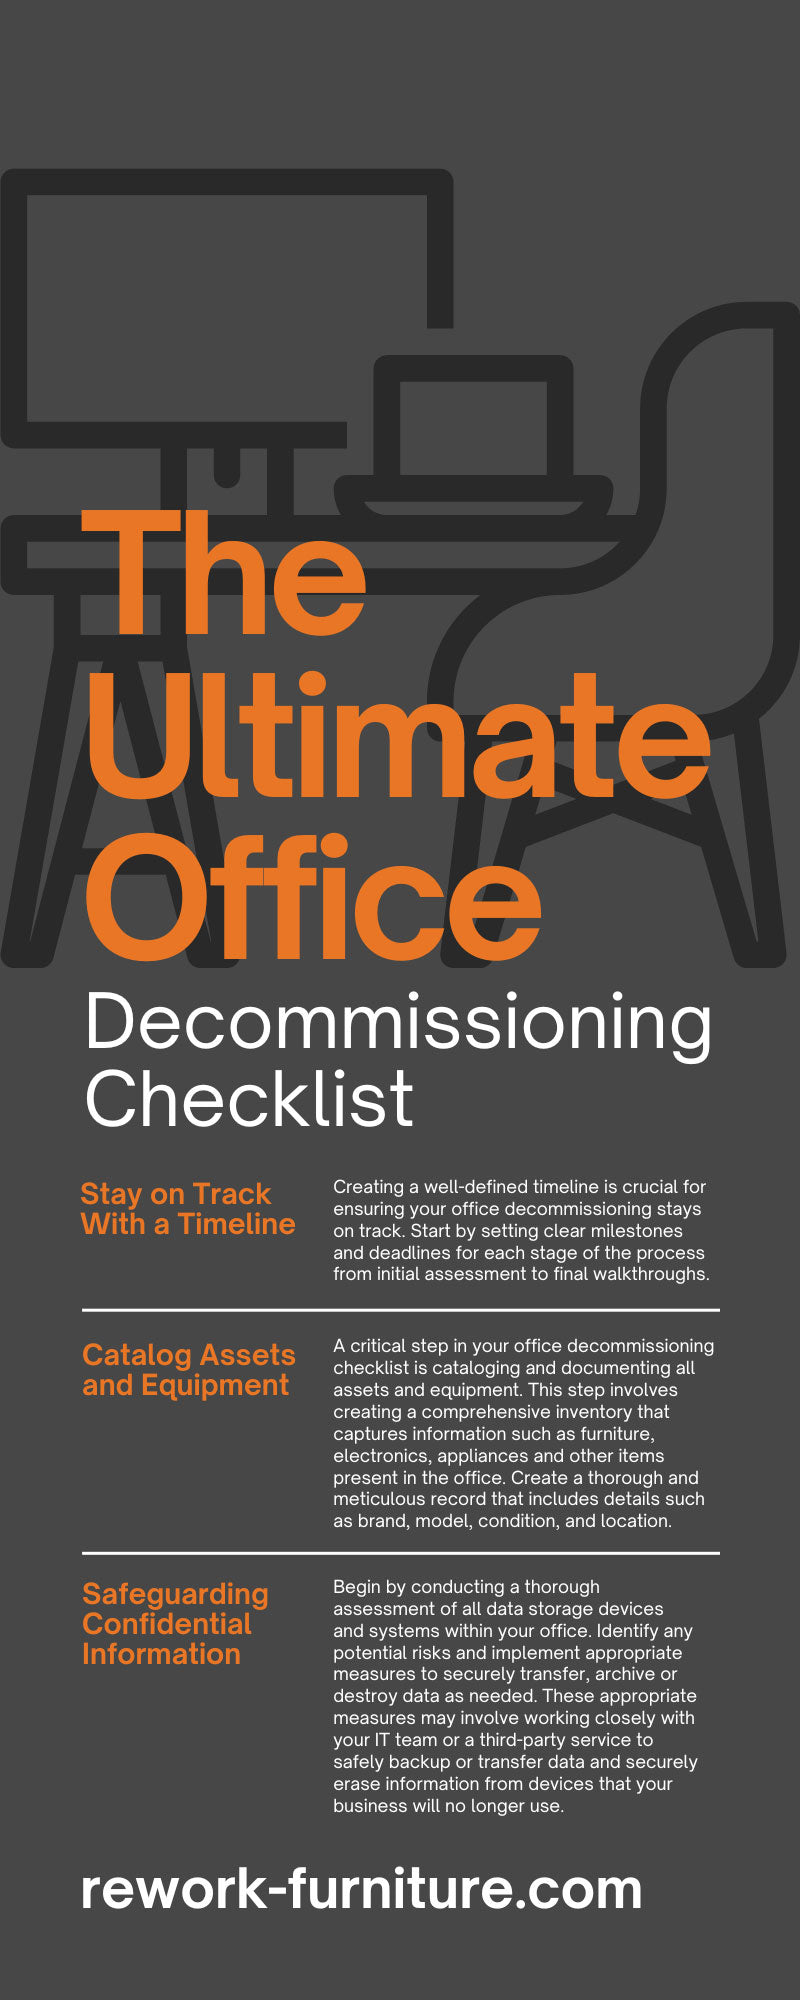 The Ultimate Office Decommissioning Checklist